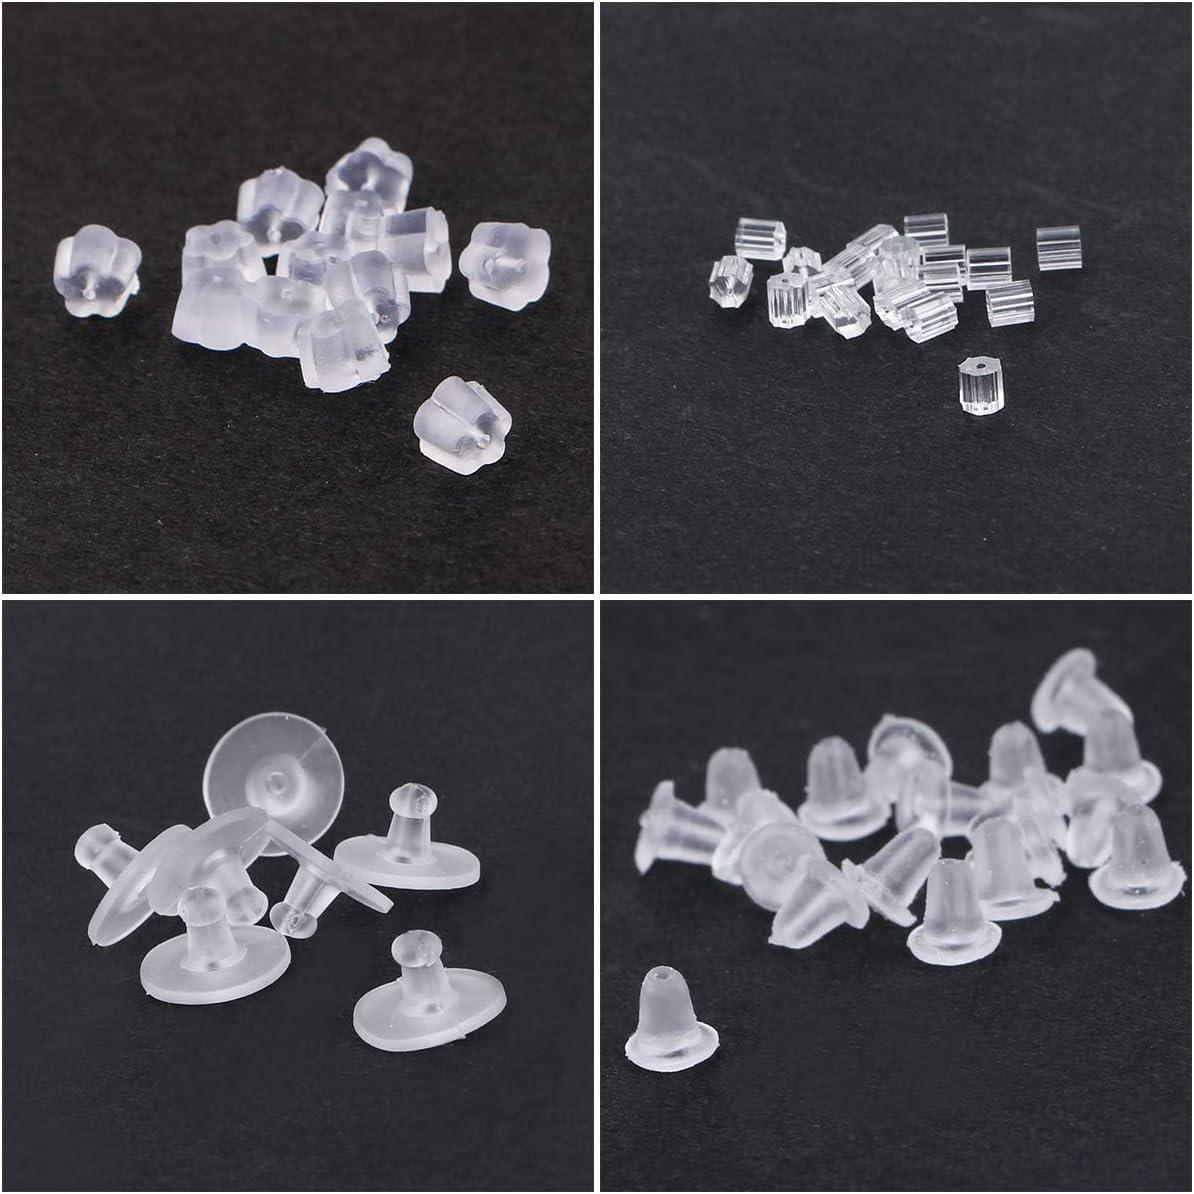 Amazon.com: Silicone Earring Backs, 200PCS Soft Earring Stoppers, Clear  Earring Backing Replacement for Stud Post Fishhook Earrings, Hypoallergenic